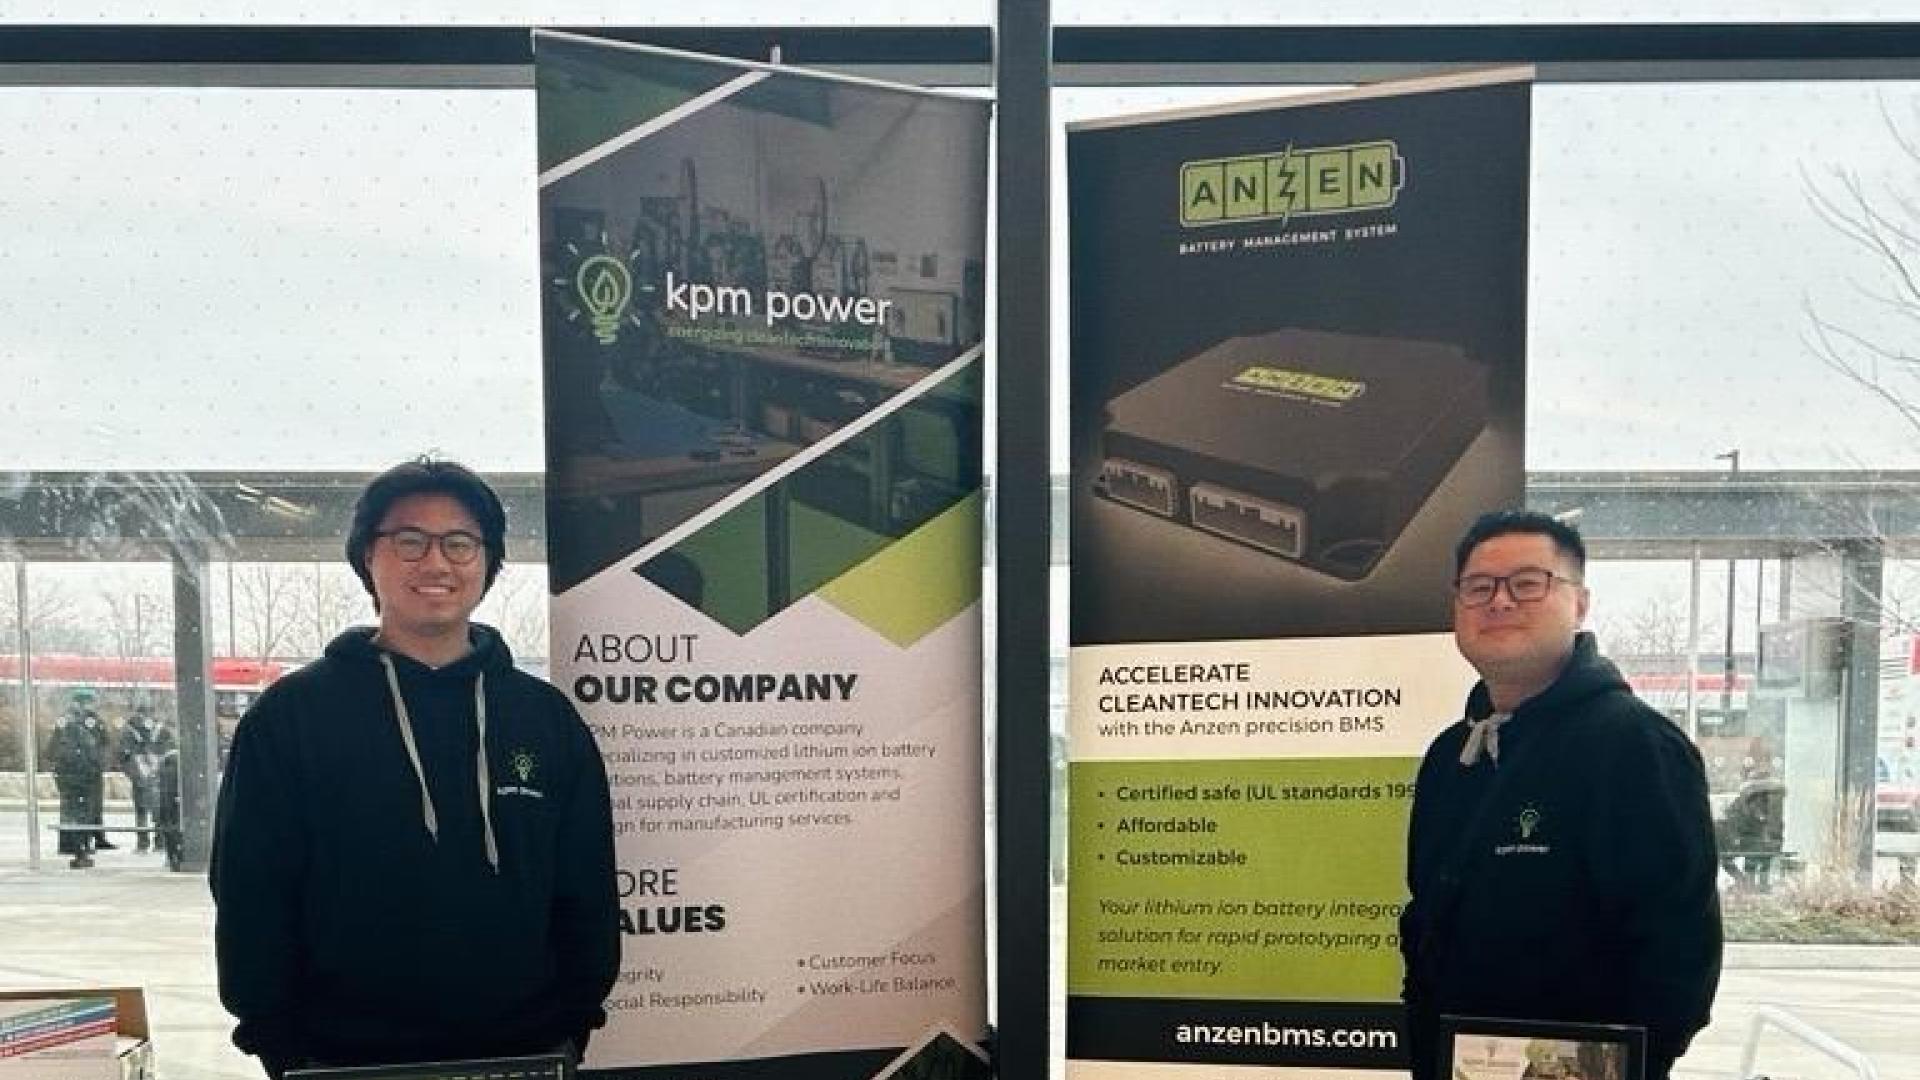 Chang Duong and Allan Dayrit stand smiling at the KPM Power booth in front of a window at Humber's North Campus for the January for the W24 Humber FAST Co-op Engineering Event.